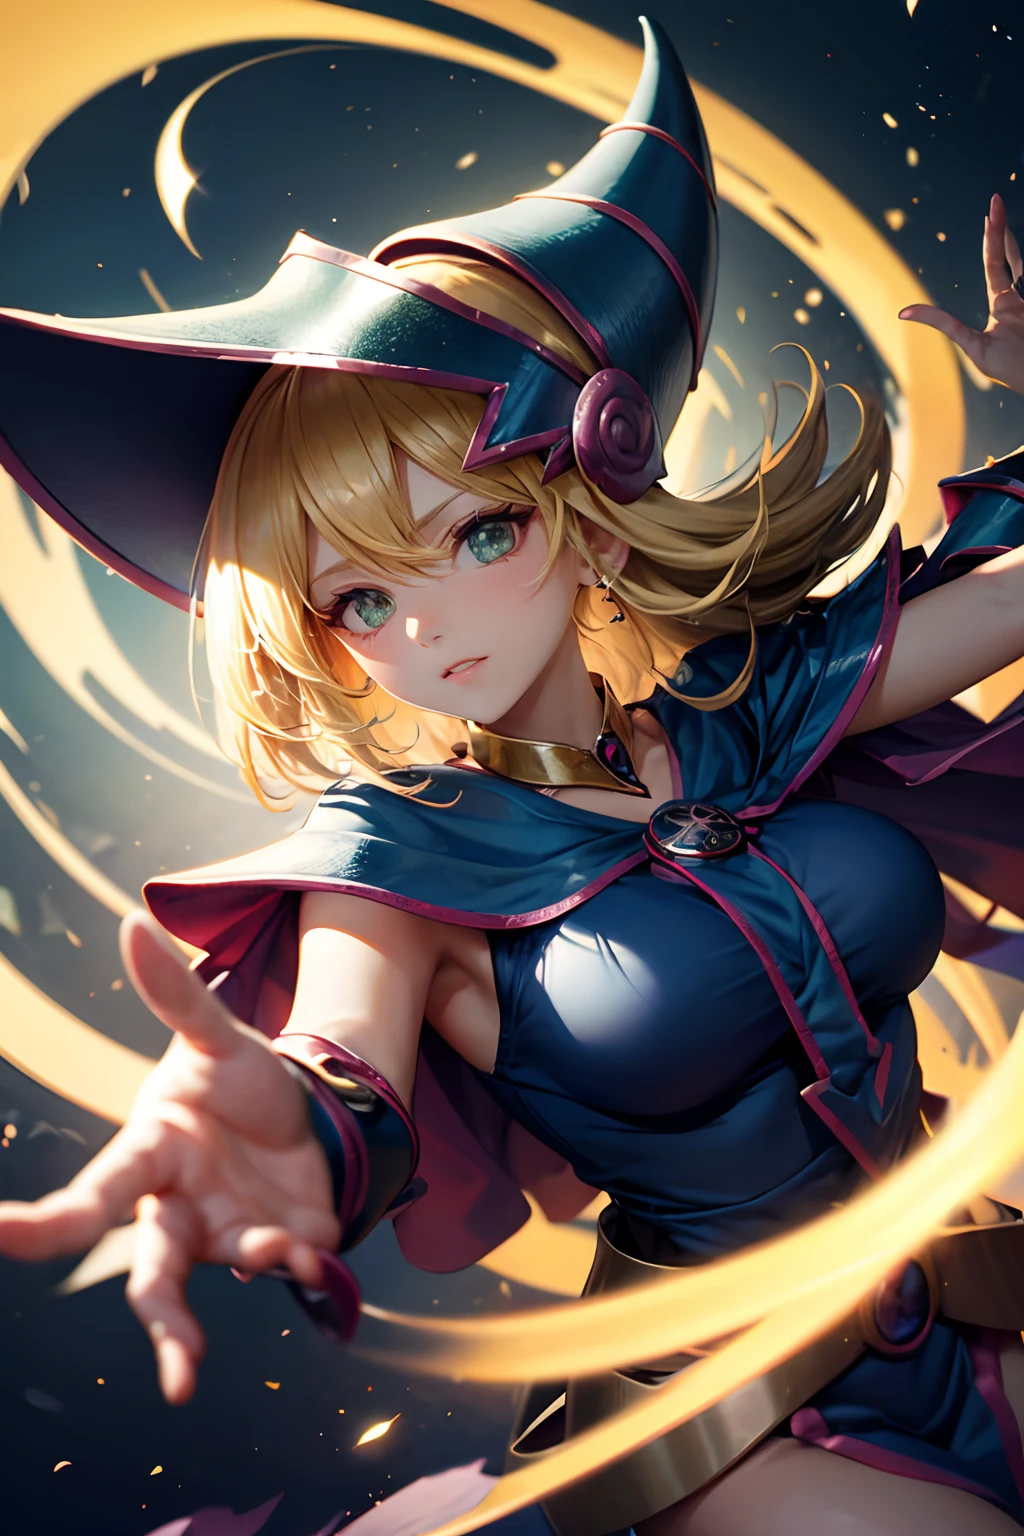 (Masterpiece:1.2), (The best quality:1.2), Perfect lighting, Dark Magician Girl casting a spell, floating in the air, big tits, neckline, magic background. Transparent hearts in the air, blue robe, big hat, From above, sparkles, Yugioh Card in the background